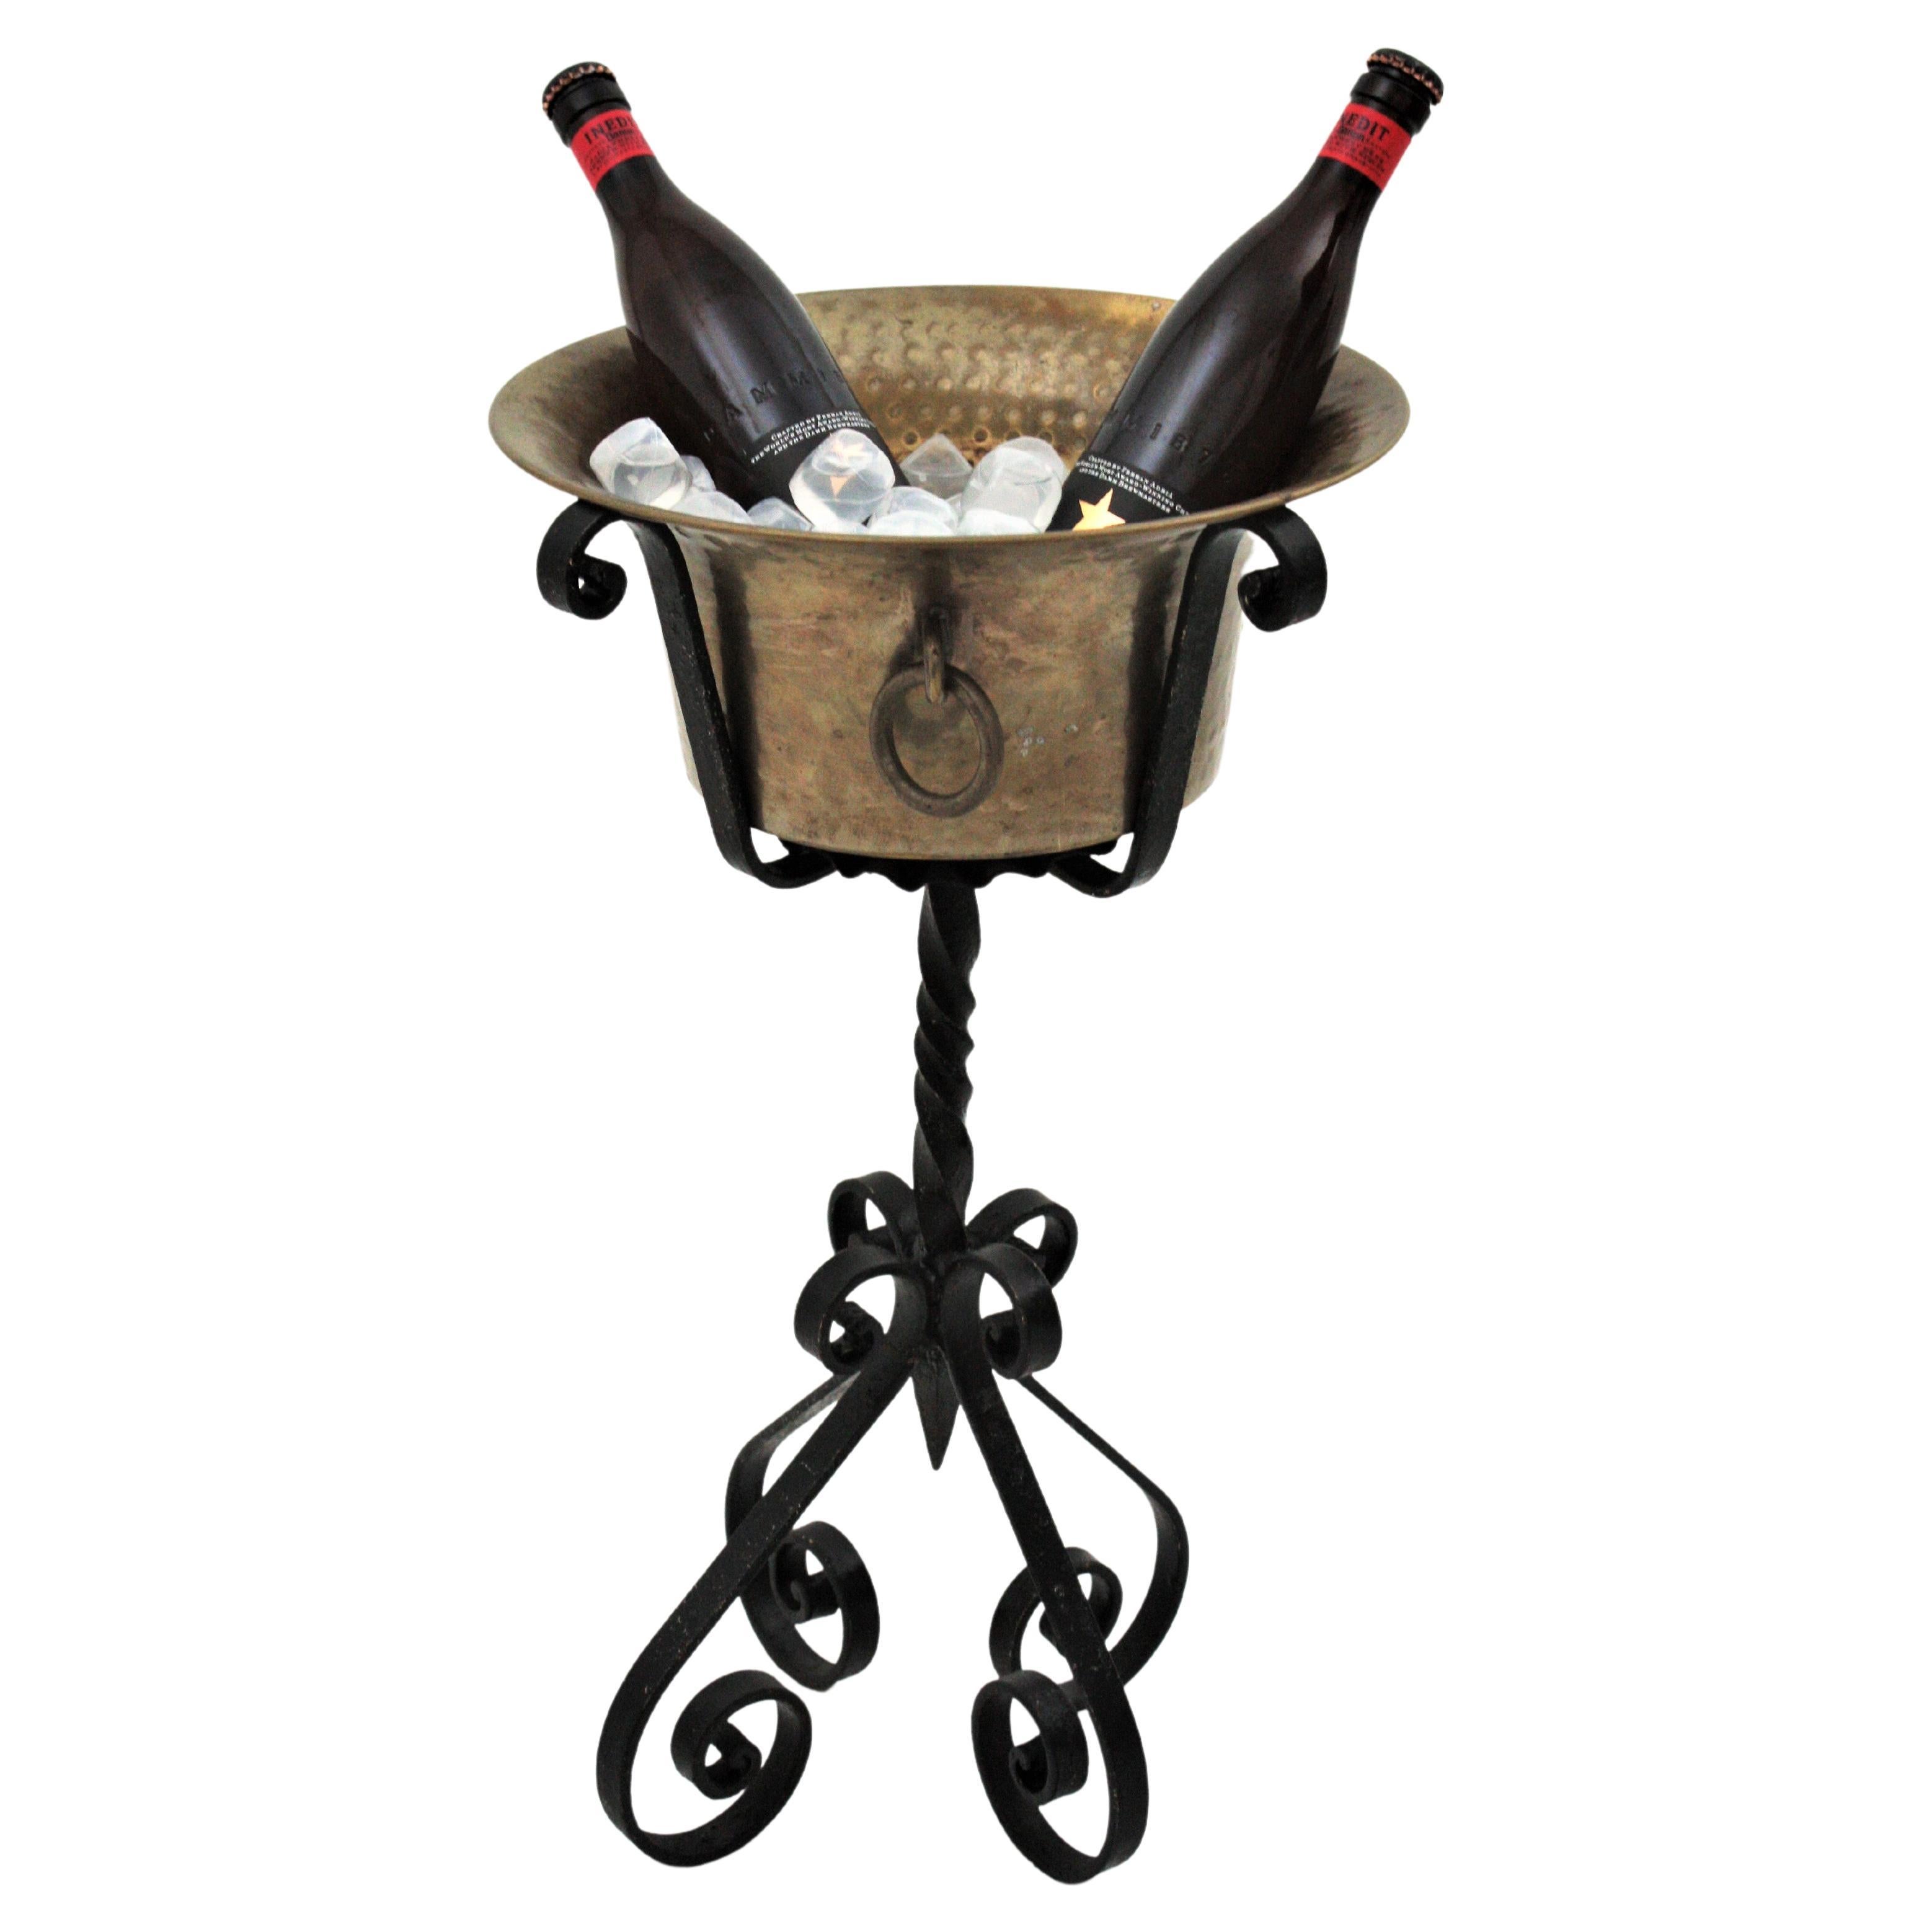 Spanish Colonial Wrought iron stand with with hand-hammered brass ice bucket, Spain, 1930s-1940s.
This pedestal champagne serving stand is all made by hand. The handwrought iron stand has a four footed base with scrolled endings, twisting details on